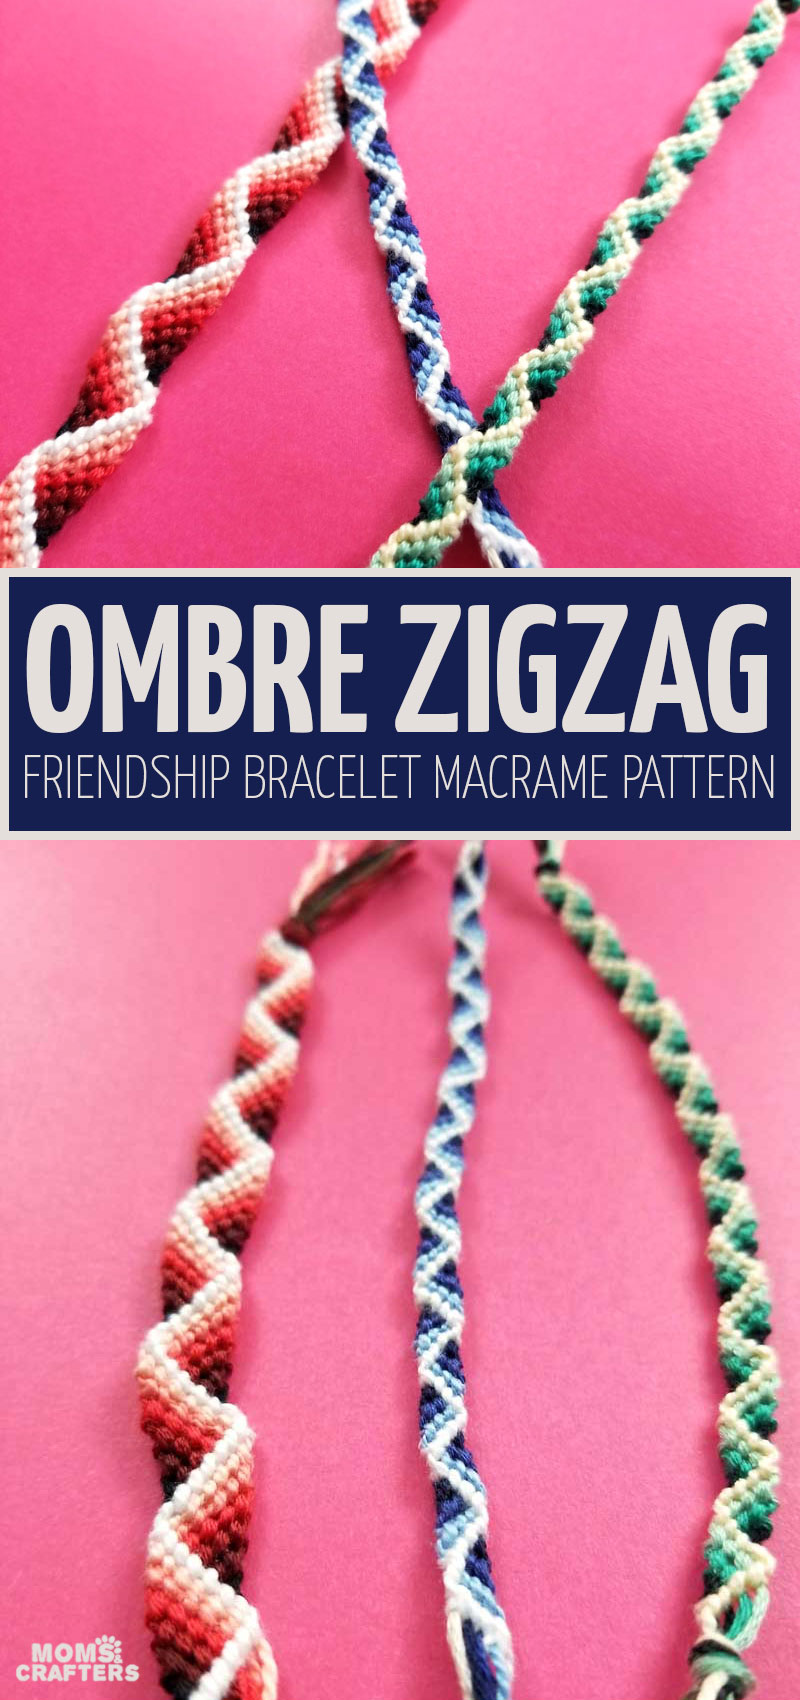 Making Alphabet Friendship Bracelets: 52 Designs and Instructions for  Personalizing (Design Originals) How to Braid and Knot Names, Words,  Phrases, Numbers, and Inspiring Messages to Wear or Share: Suzanne McNeill:  9781497205048: Amazon.com: